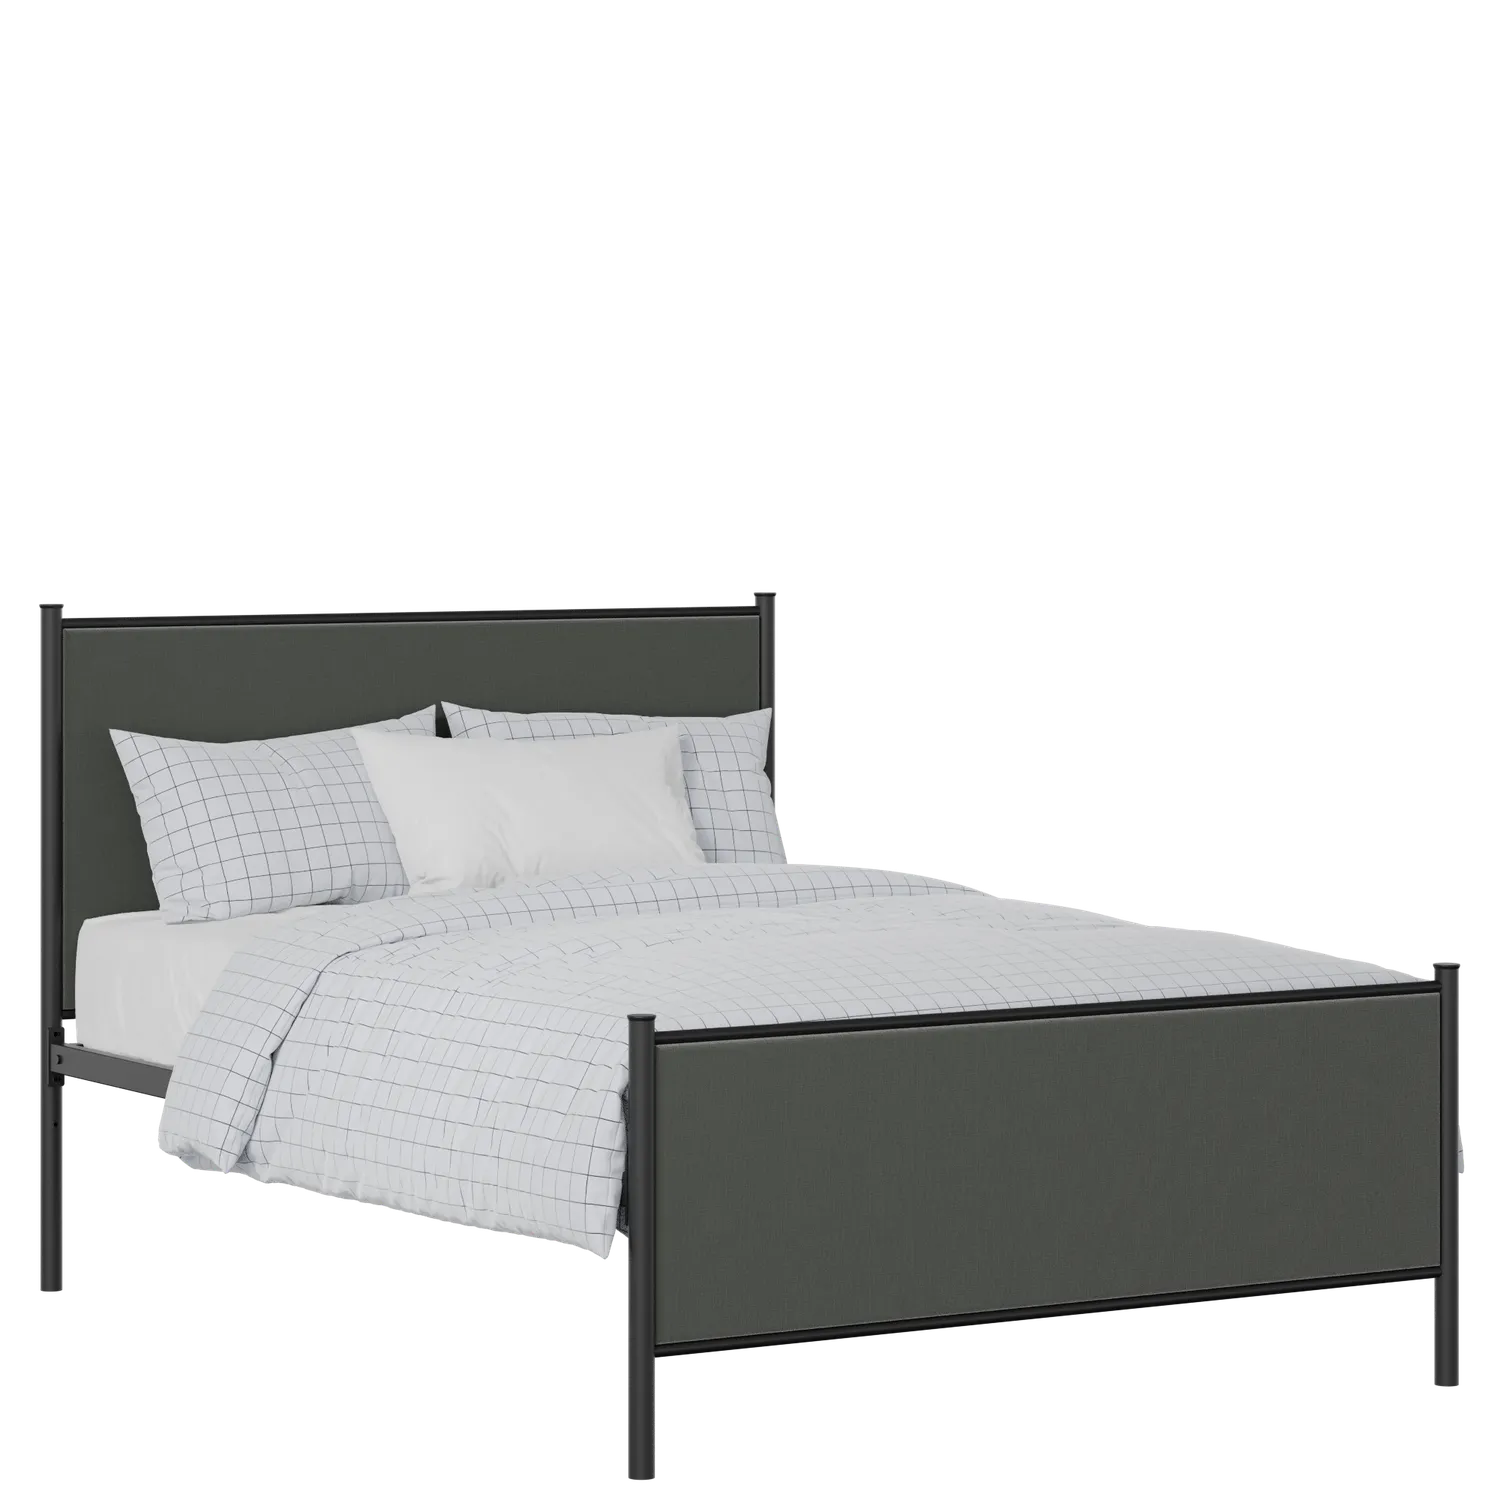 Brest iron/metal upholstered bed in black with iron fabric